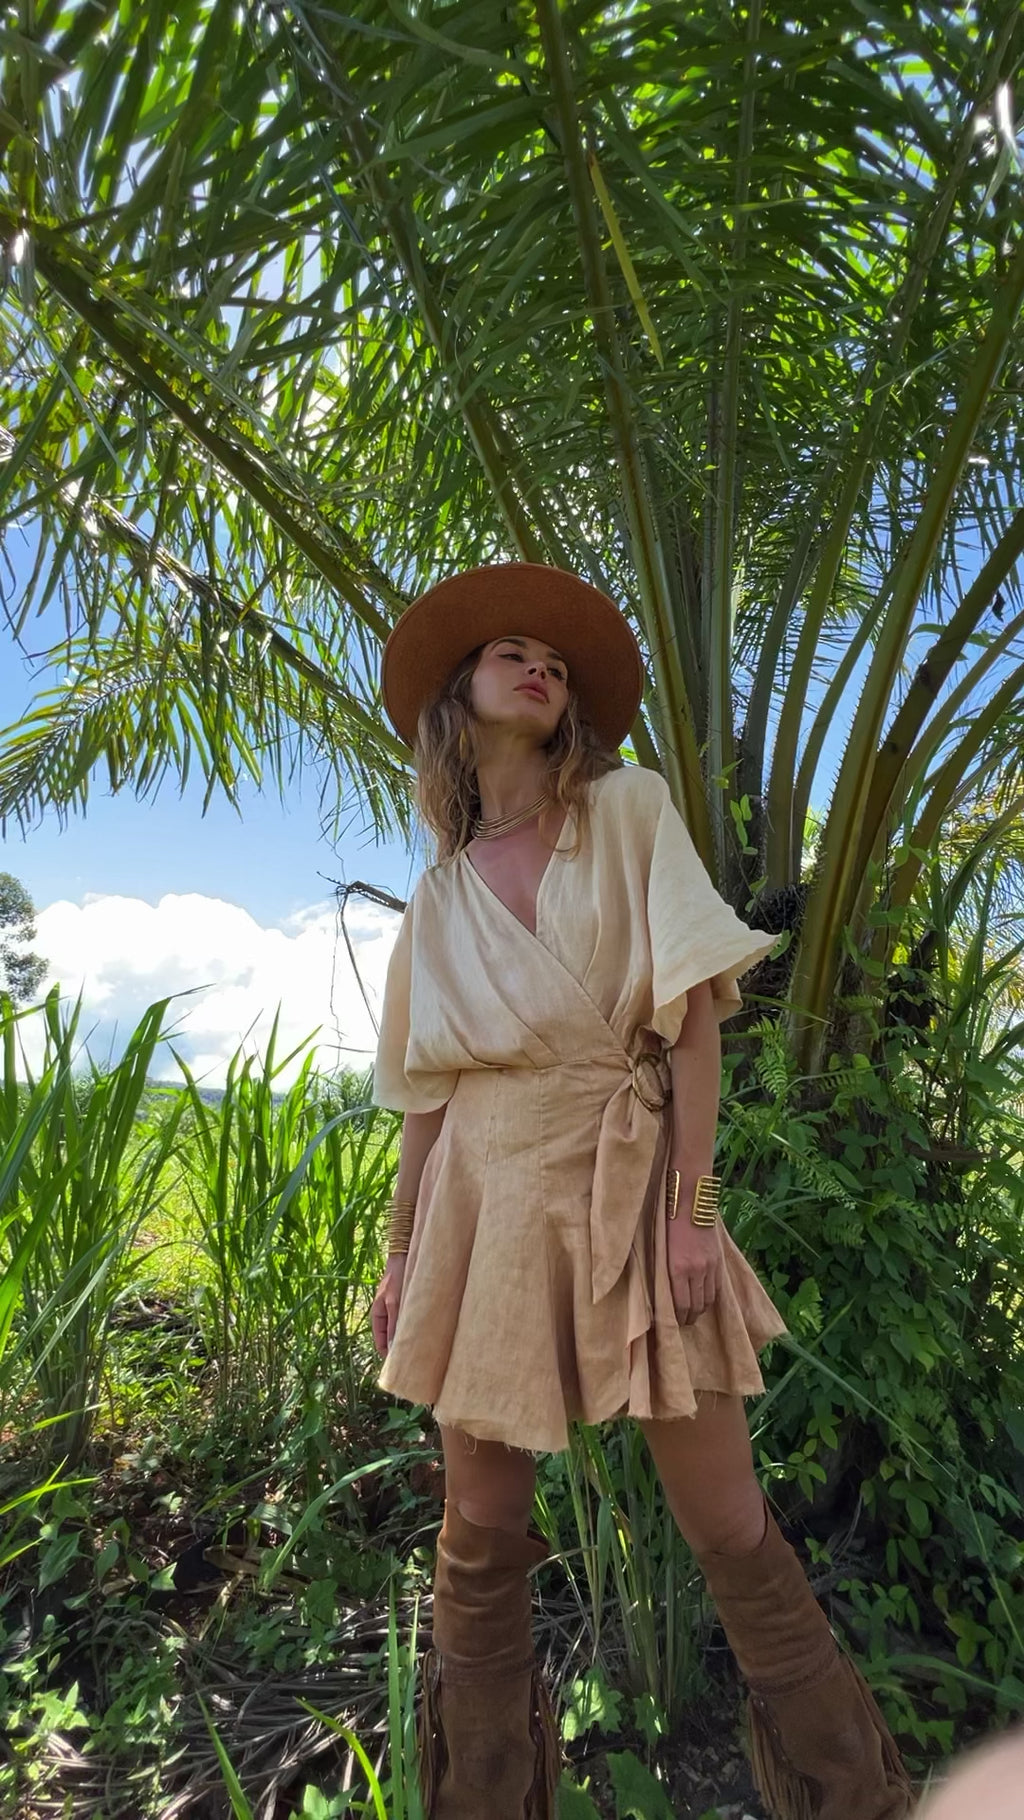 Multiway Wrap Kimono Dress: Versatility meets style in our multiway wrap kimono dress. Crafted from sustainably dyed organic linen, its ombre effect adds a unique touch to any ensemble.